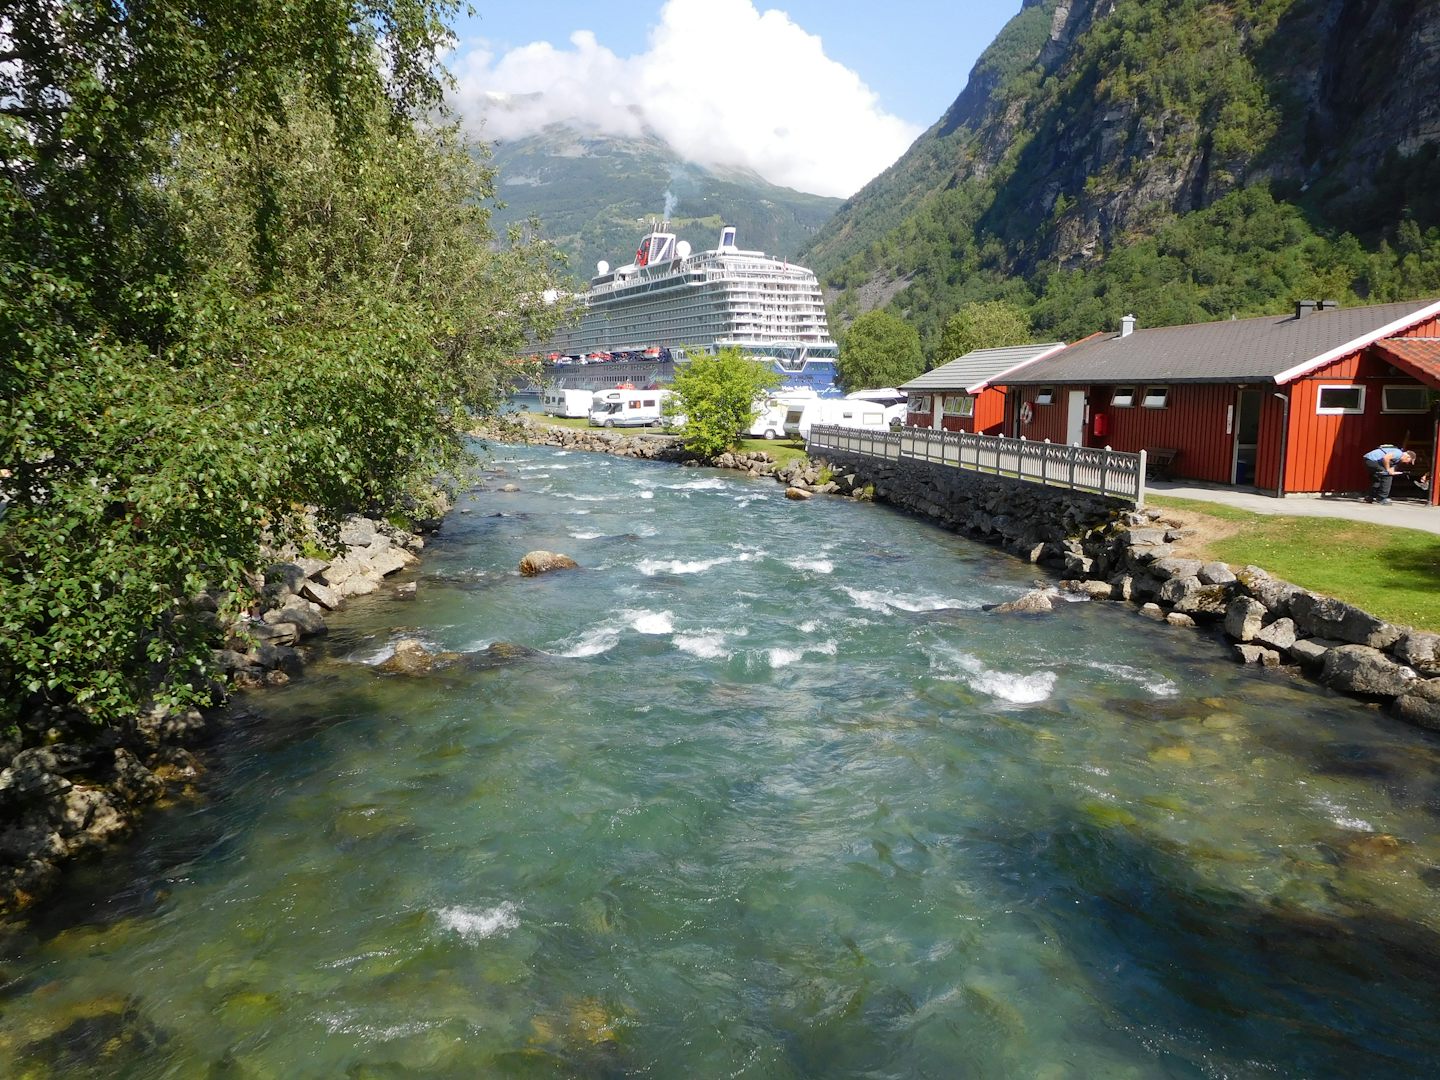 Geiranger, Norway looking down stream from the waterfalls to our ship the V